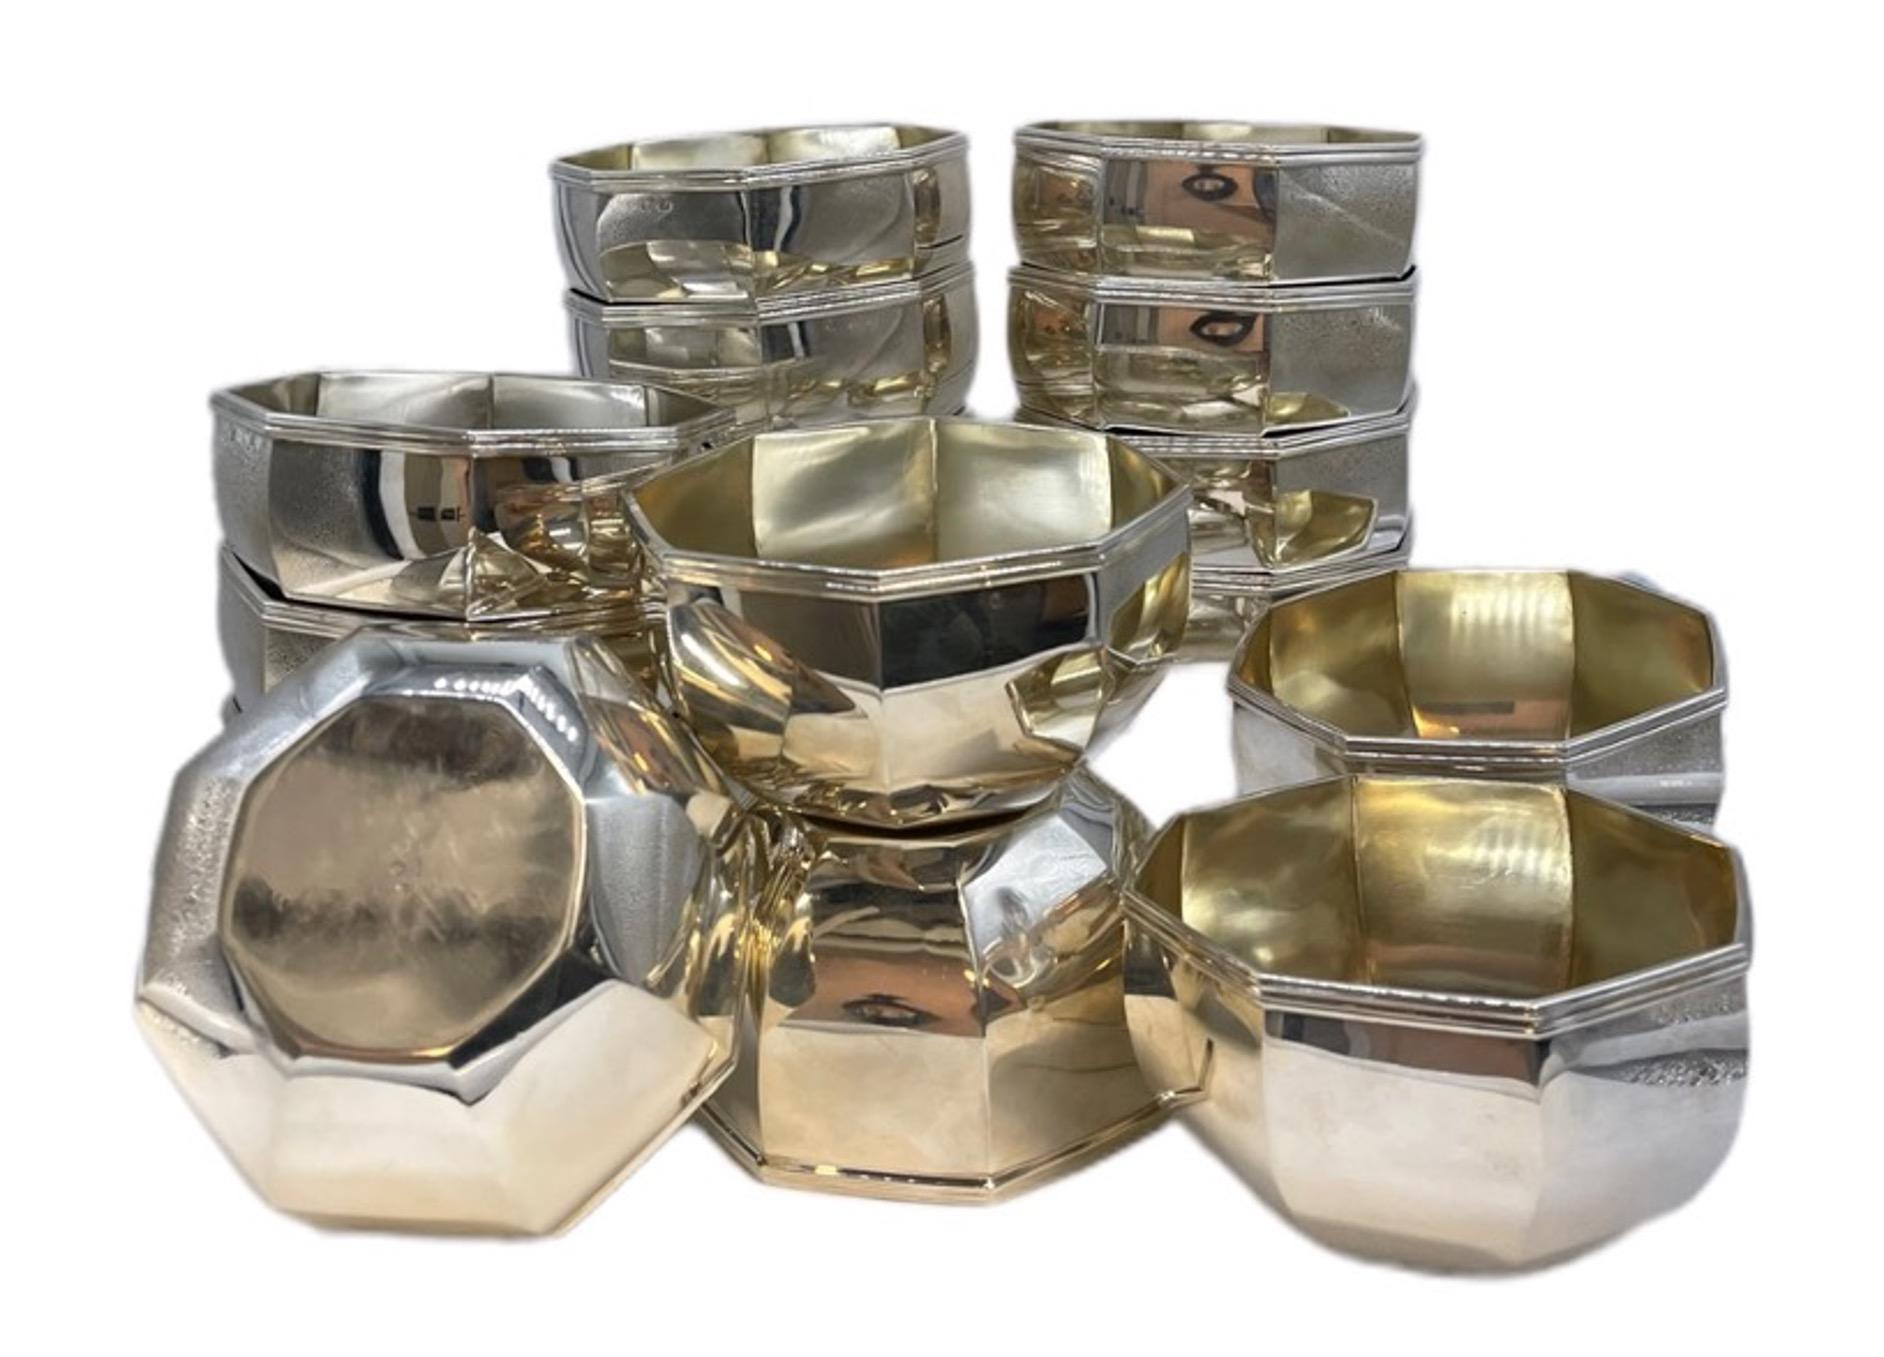 A complete set of 16 sterling silver (950 Silver) French bowls by Tetard Freres from the 1920s. The bowls are octagonally shaped. Very clean and pure art-deco design and marked on the bottom by the maker. Tetard Frerer is famous for their elegant,